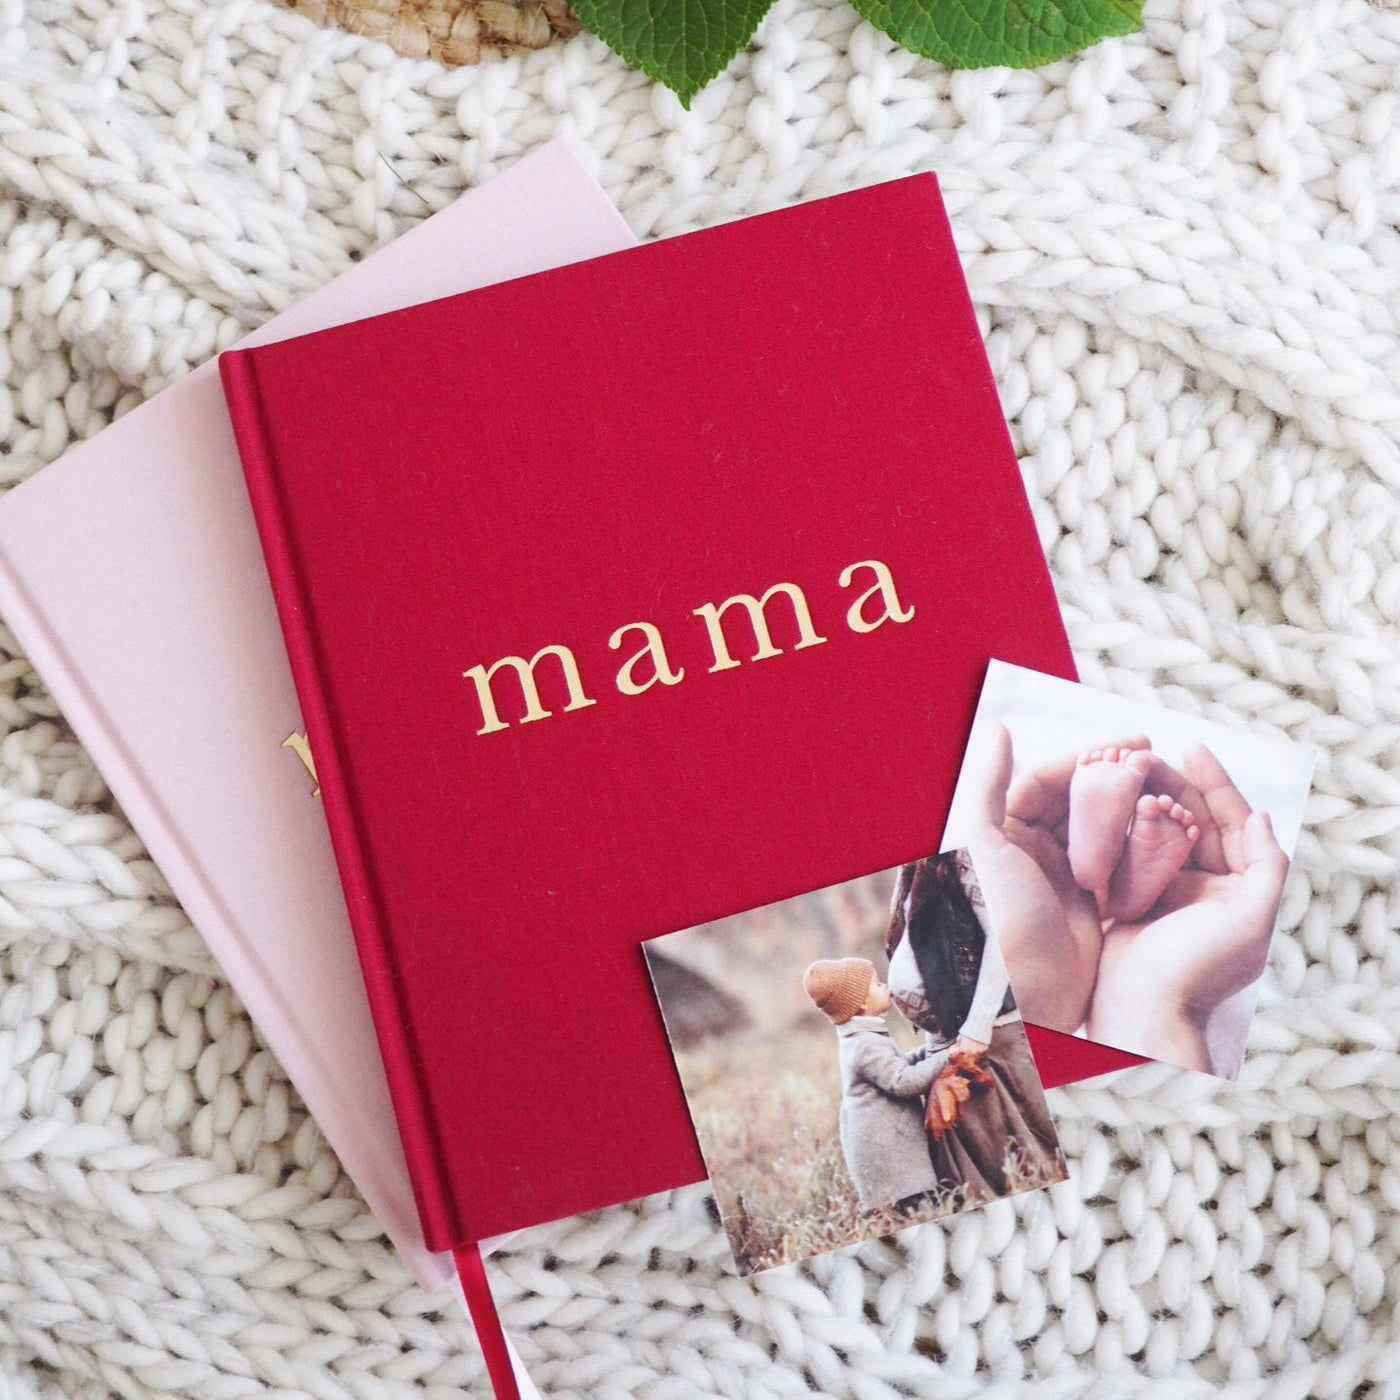 Mama - Tell Me About It - Maroon Journal Write To Me 